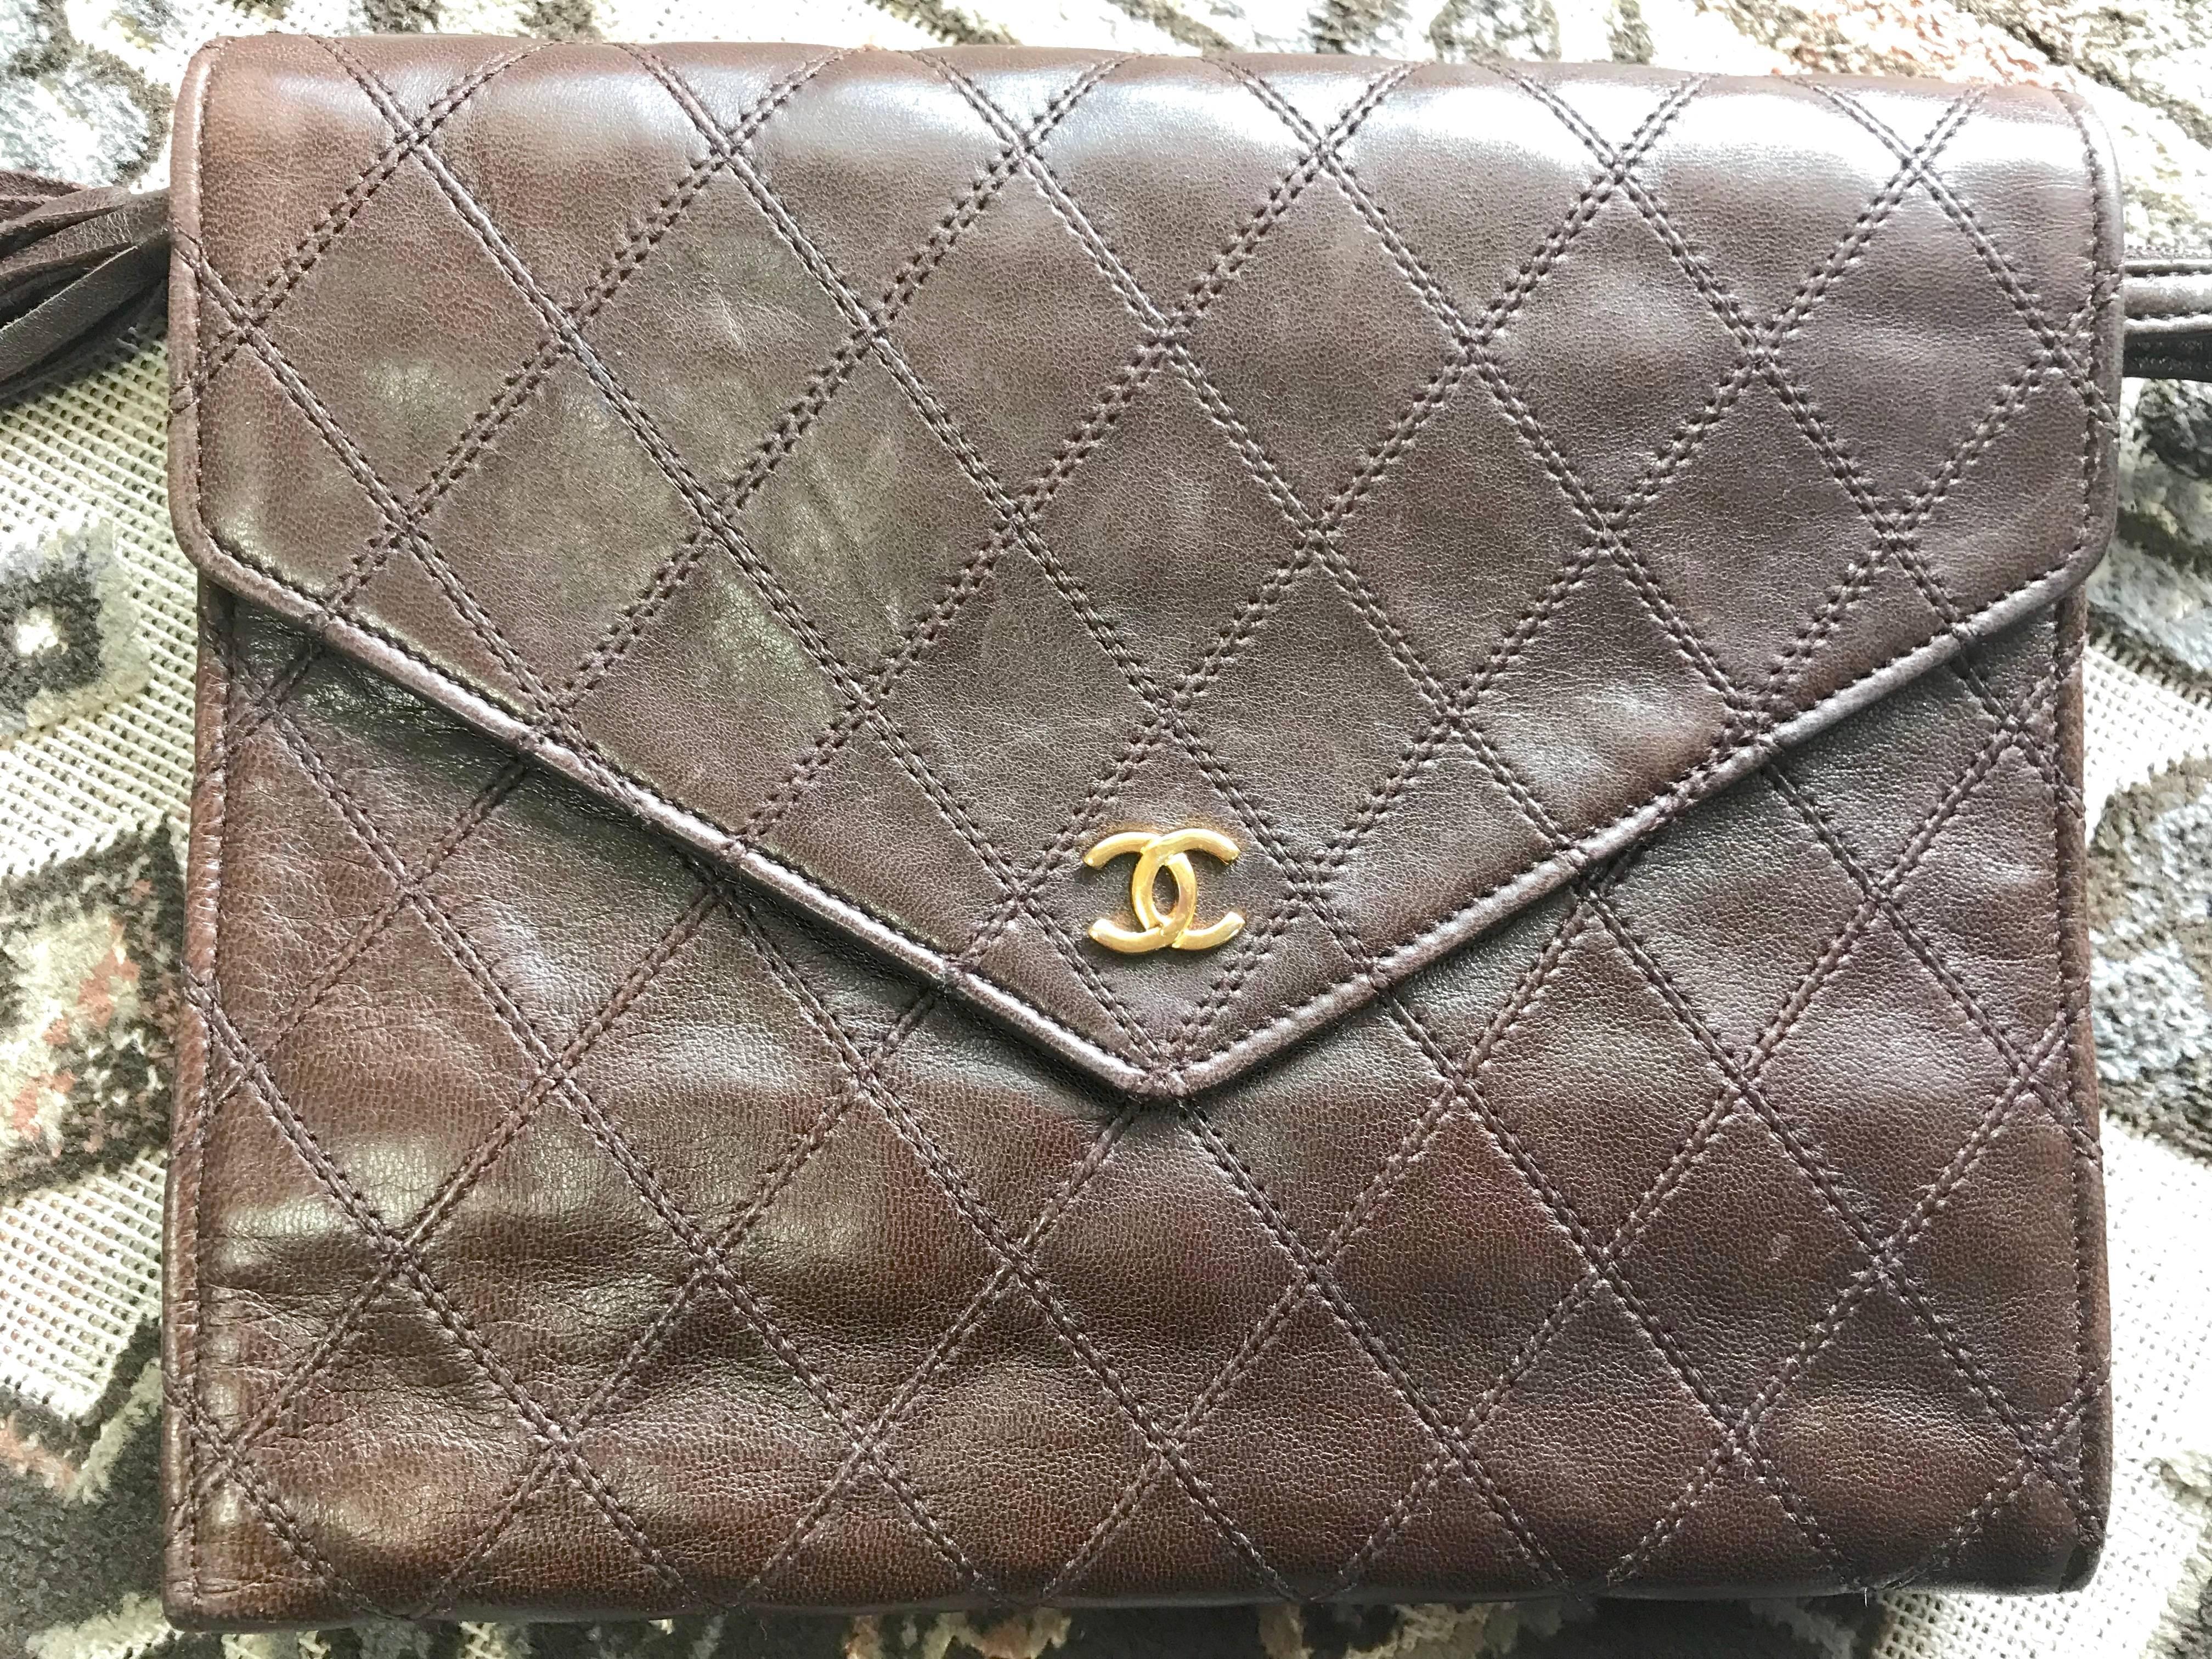 1980s. Vintage CHANEL brown goatskin clutch bag, large wallet, bill, checkbook, iPhone purse with a tassel and golden mini CC motif. Unisex use.

Introducing a CHANEL vintage functional wallet in dark brown goatskin from the 80s.
Wallet, iPhone